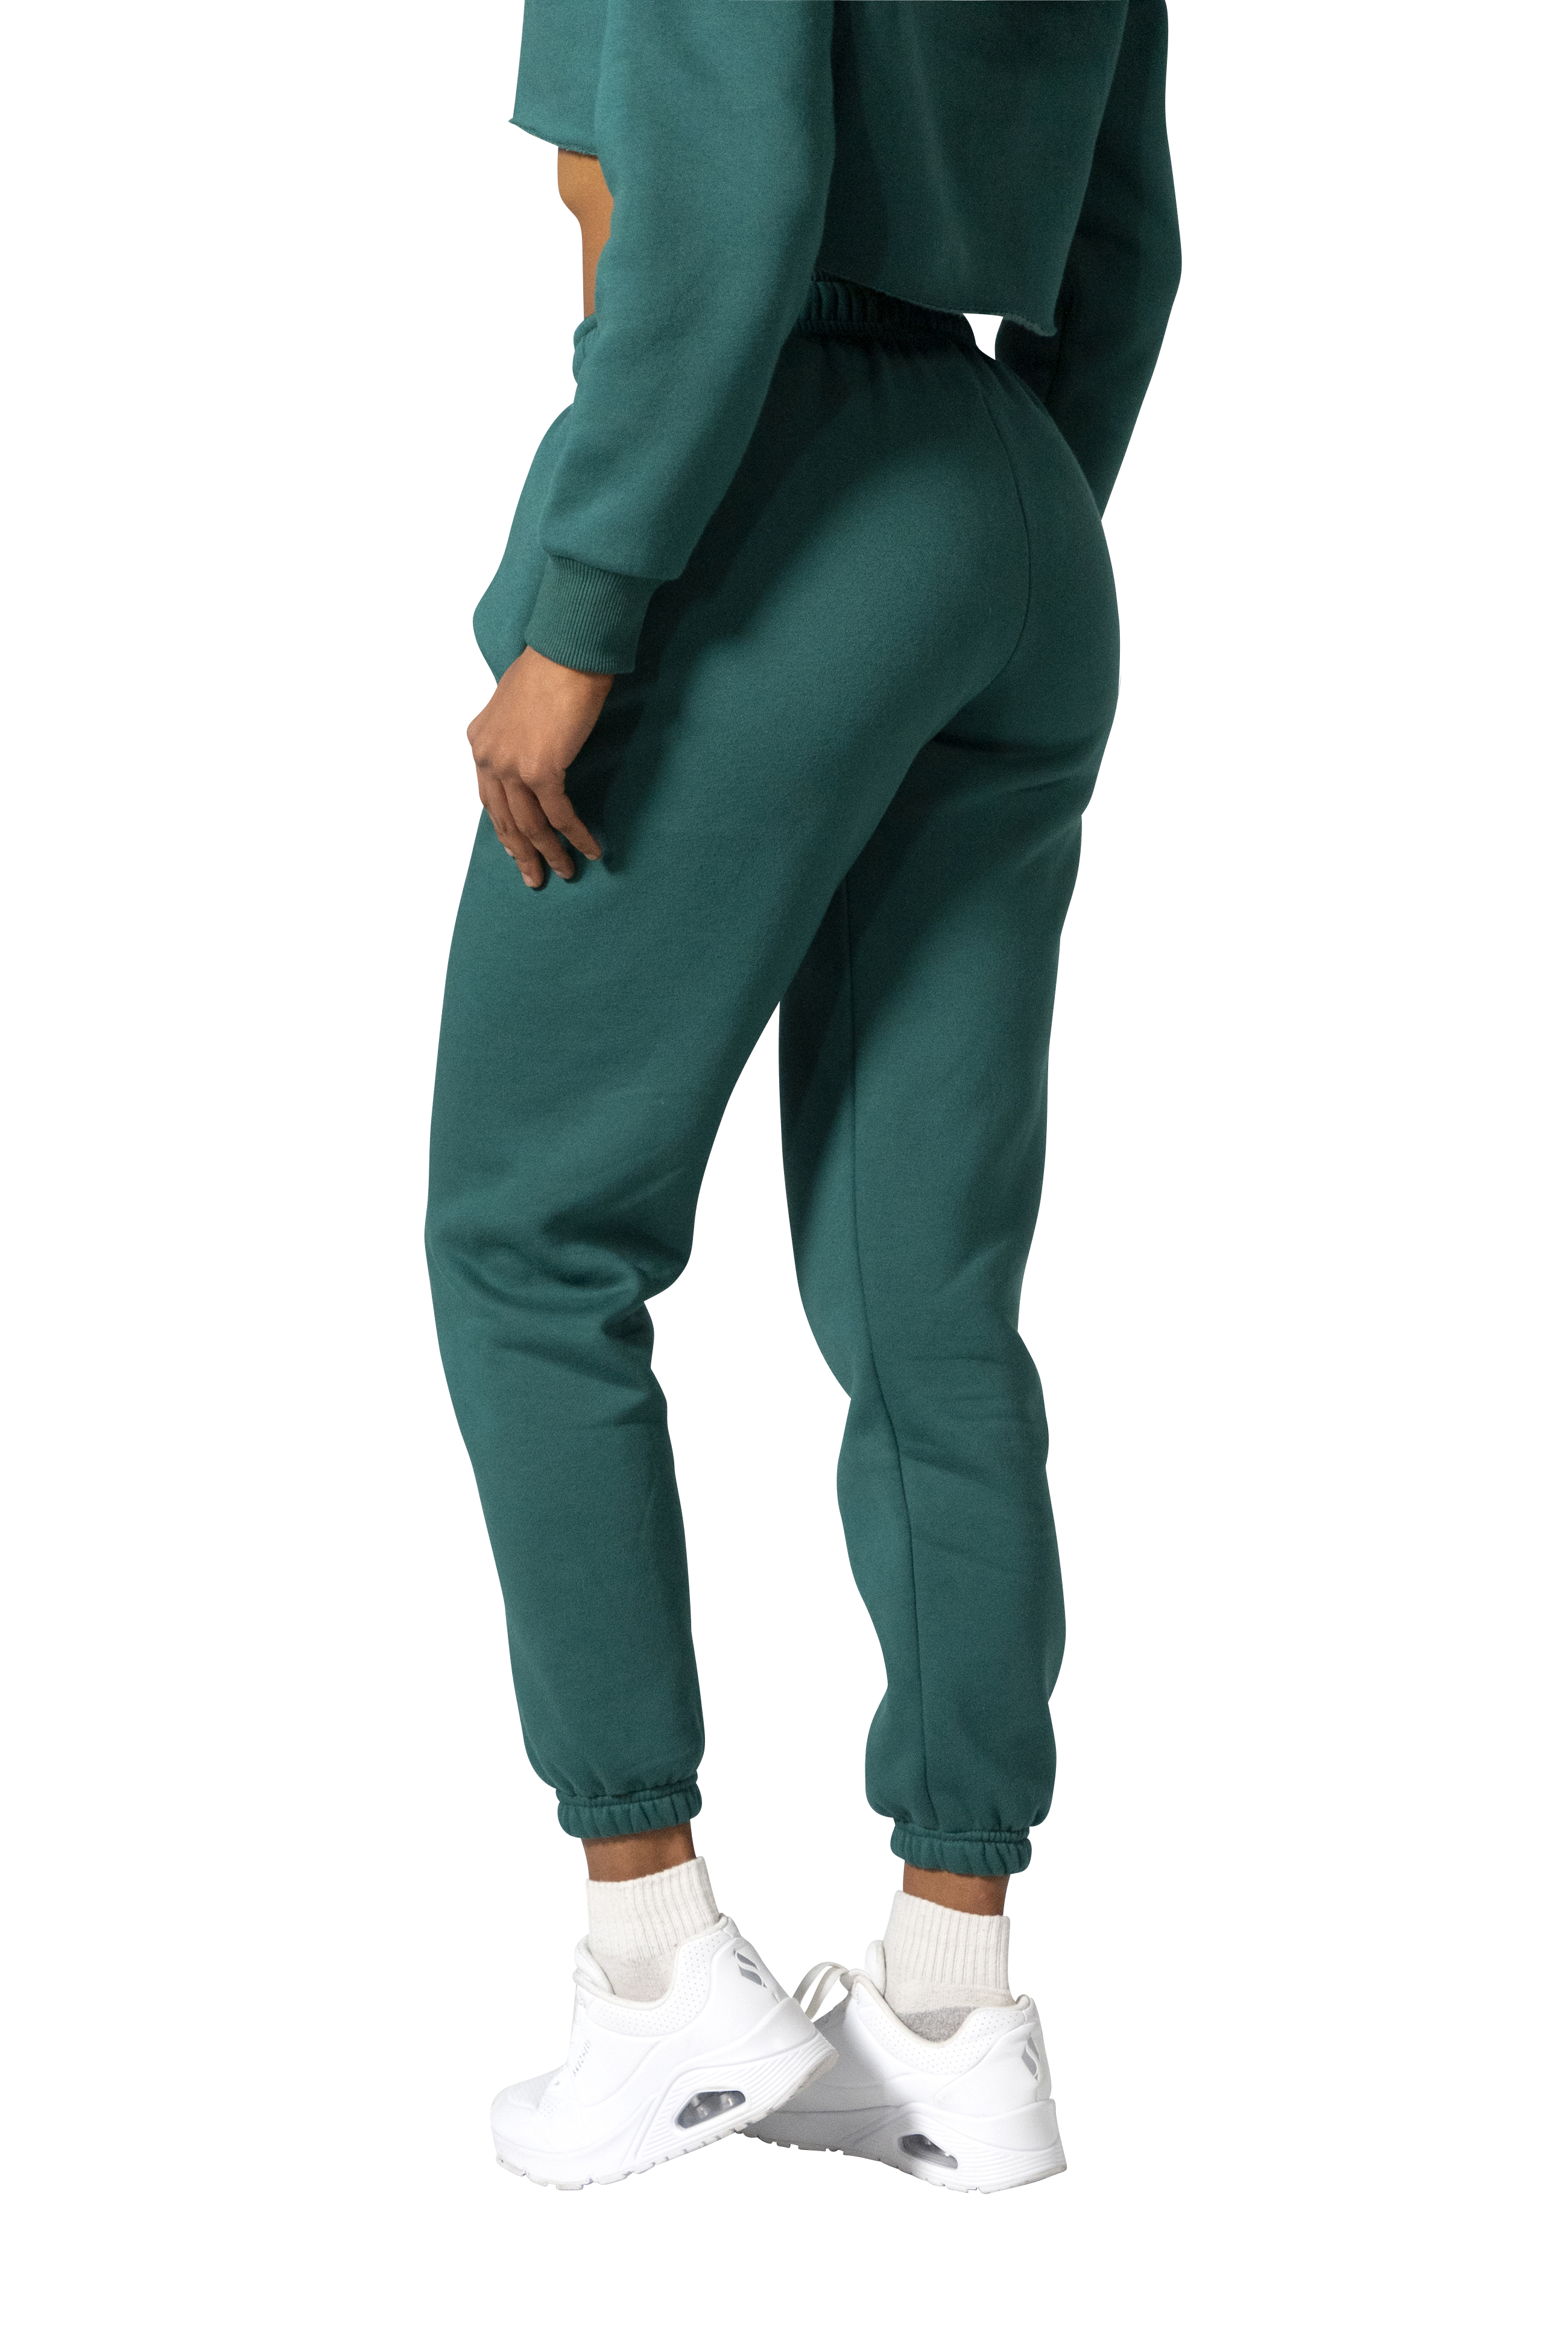 Series 1 sweatpants - Forest Green